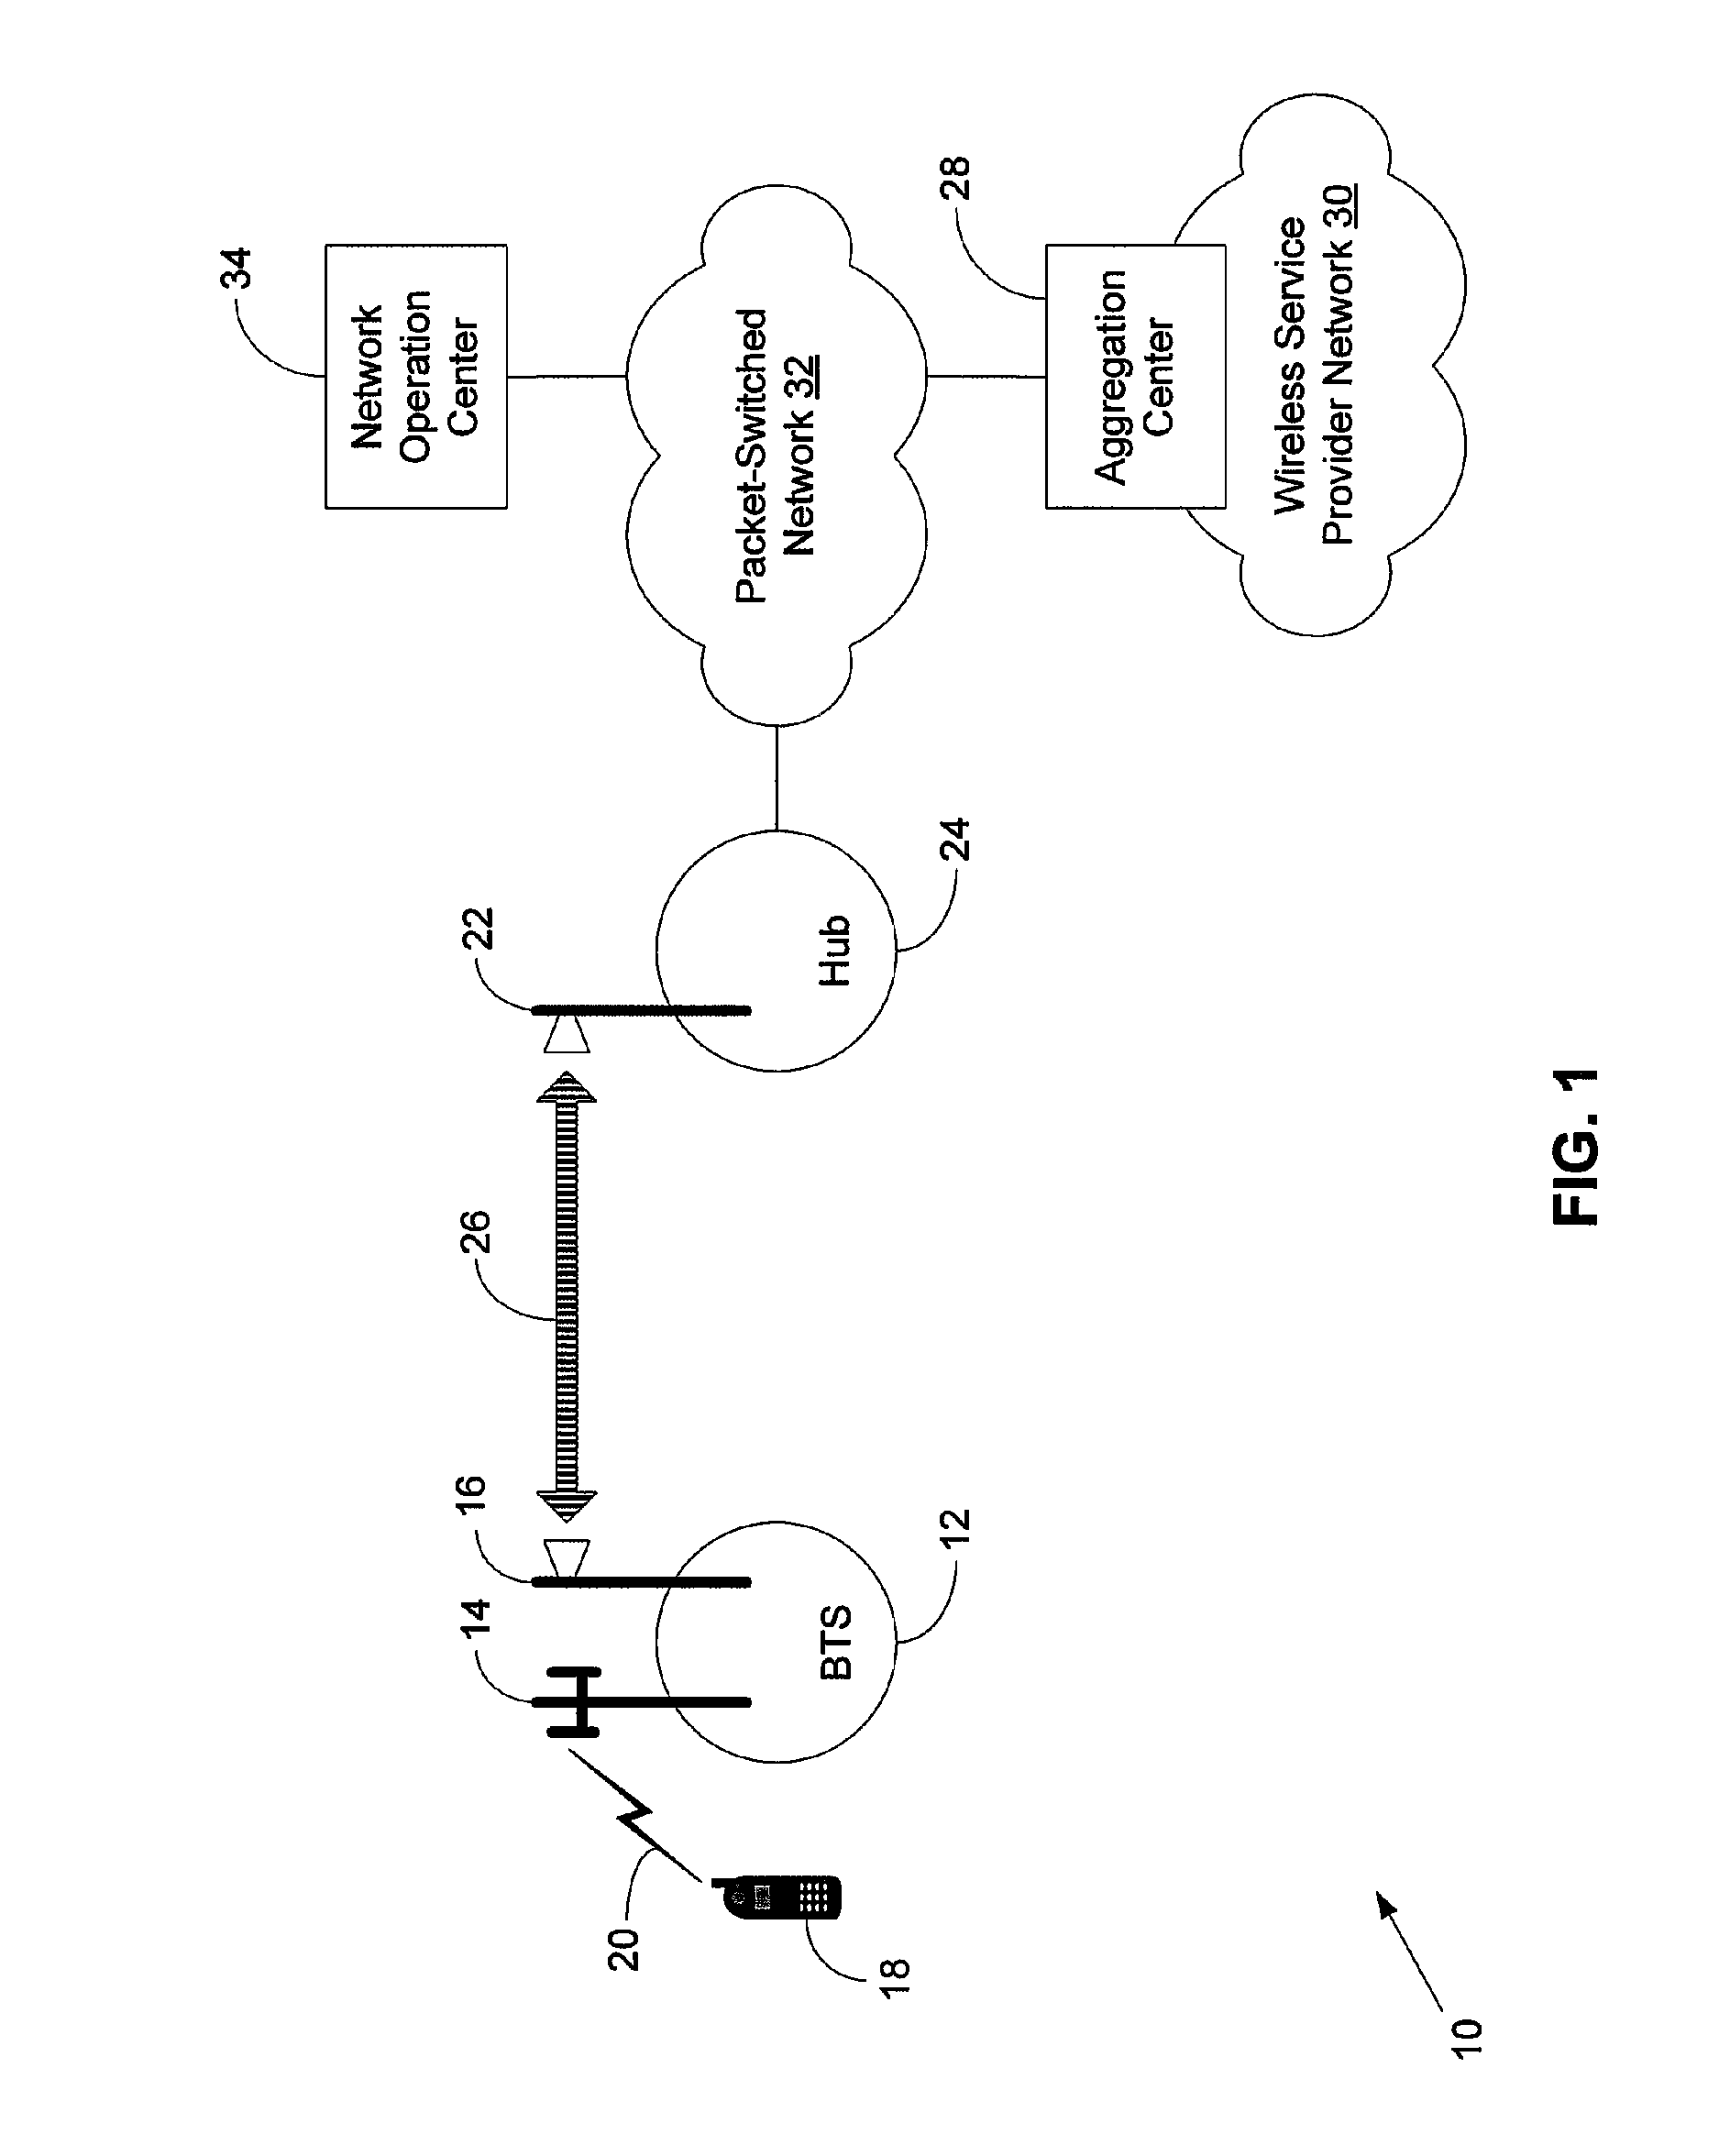 Method and system for integrated management of base transceiver station (BTS) with wireless backhaul